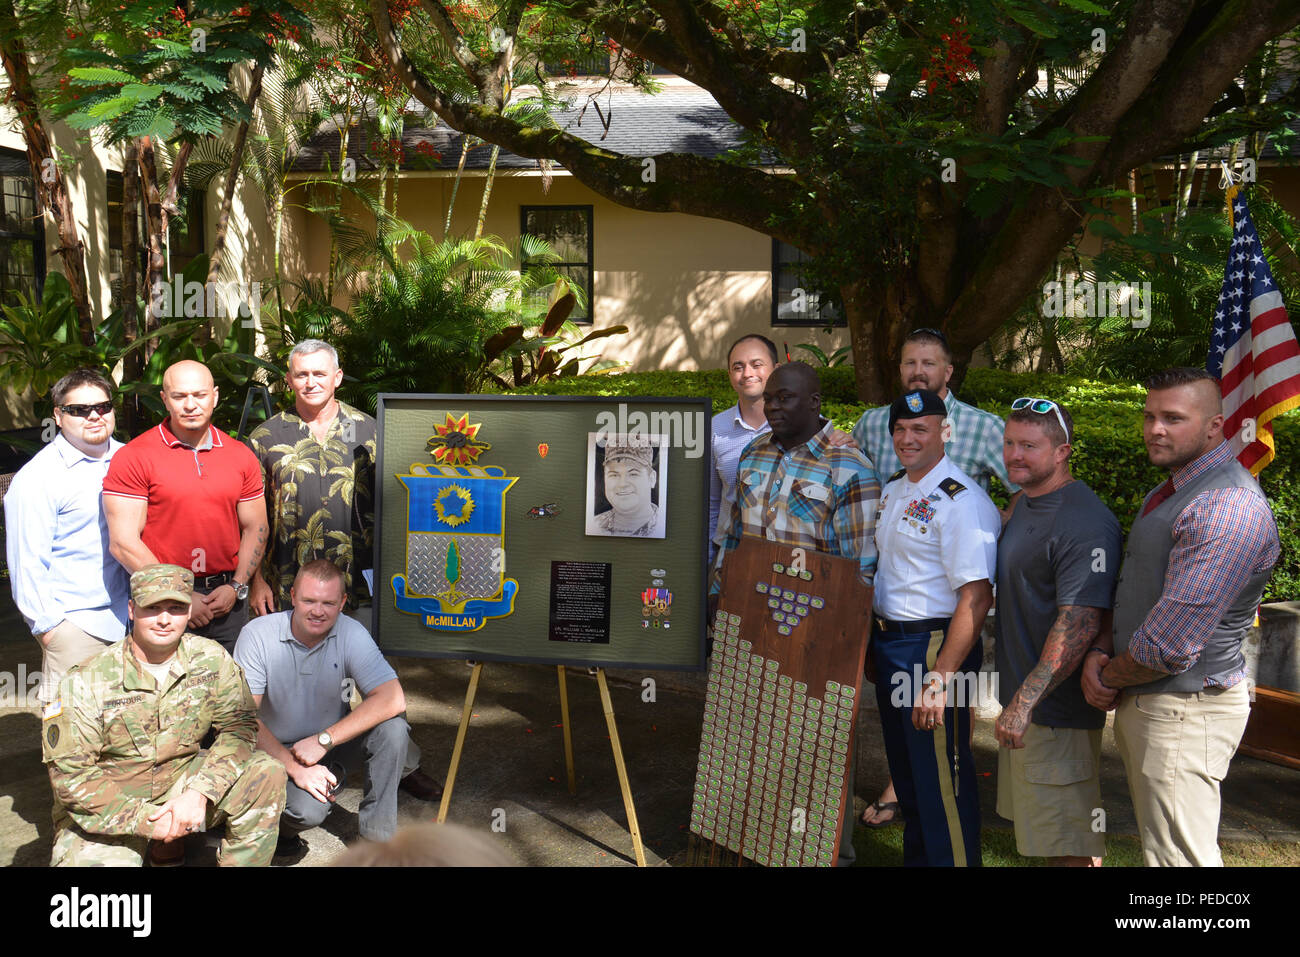 Former Soldiers 1st Battalion, 21st Infantry Regiment, 2nd Stryker Brigade Combat Team, 25th Infantry Division and battle buddies of Cpl. William L. McMillan III, a native of Lexington, Ky., take a photos next to McMillan’s shadow box during a Clinic Dedication Ceremony at the Schofield Barracks Health Center Aug. 6. McMillian, while serving on his first tour of duty, gave his life on June 8, 2008, in Baghdad, Iraq, when his patrol was struck by an improvised explosive device. (U.S. Army photo by Staff Sgt. Carlos Davis, 2nd Stryker Brigade Combat Team Public Affairs/Released) Stock Photo